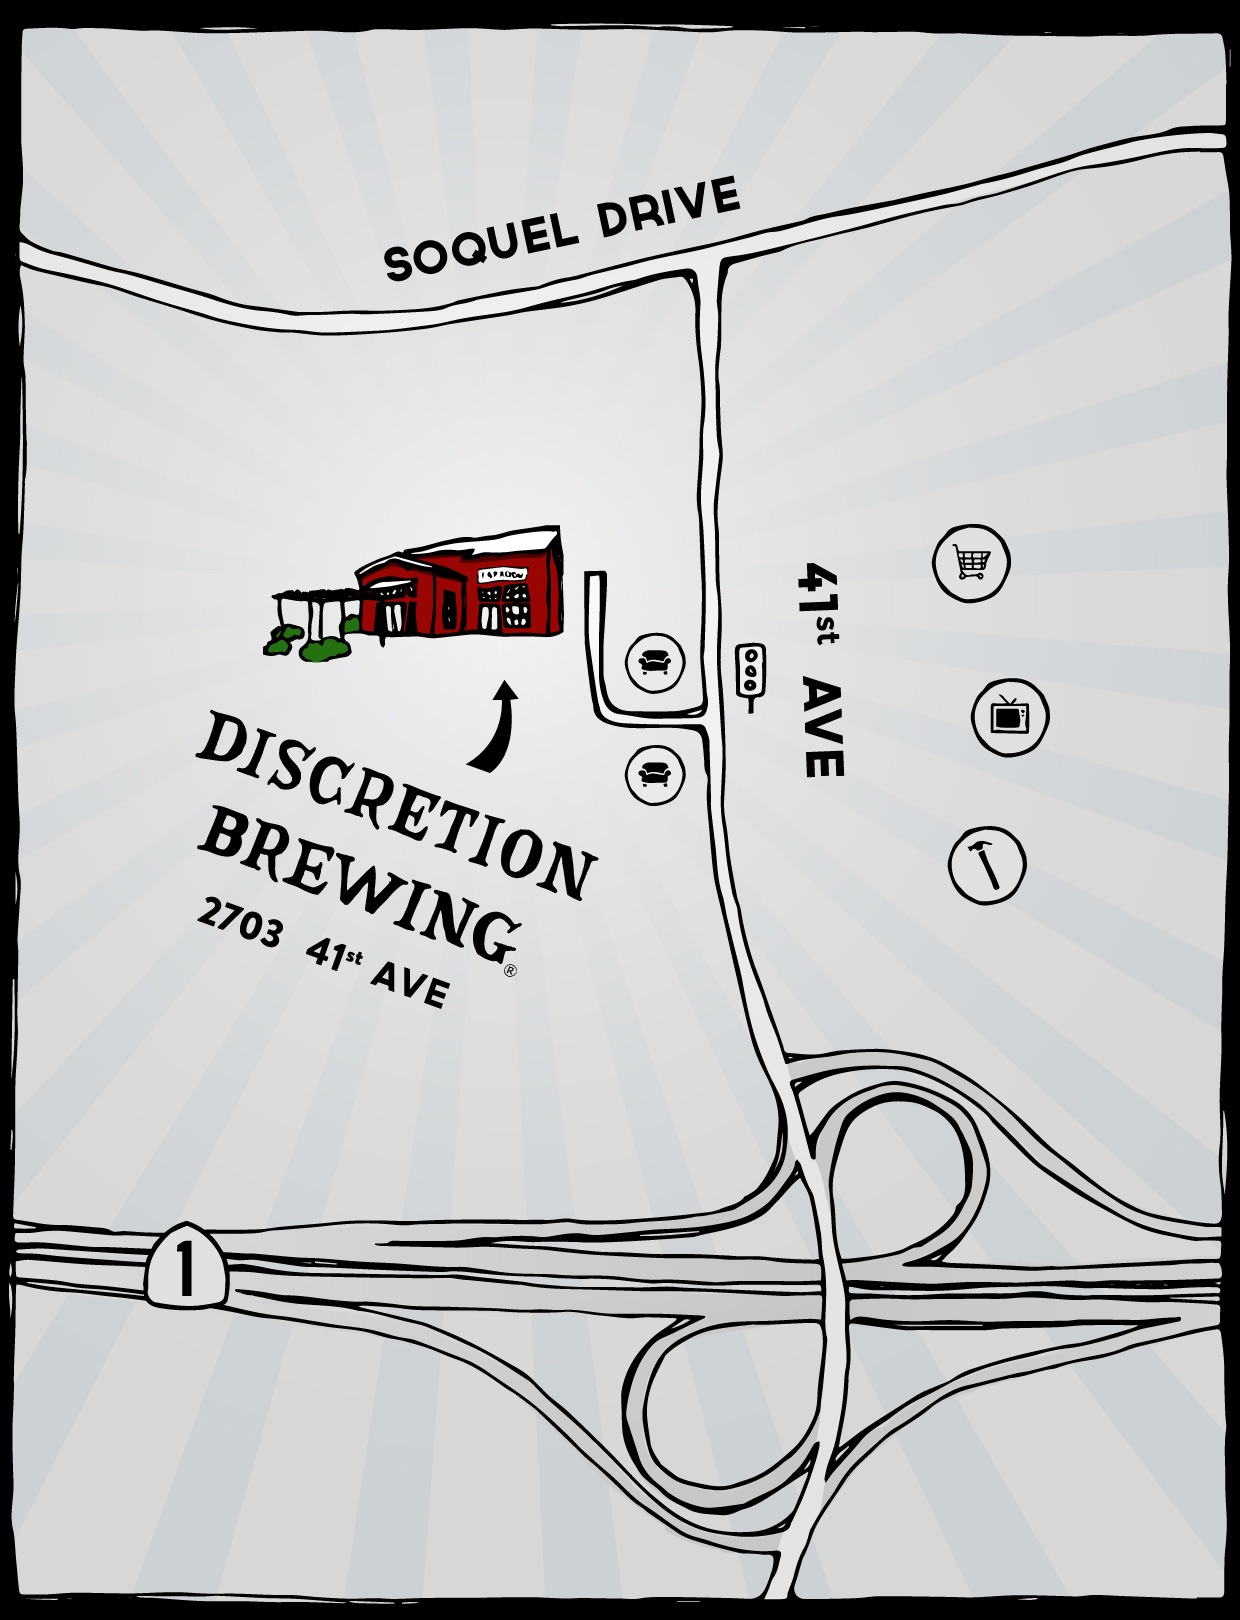 Illustrated map of of Discretion Brewing locaiton